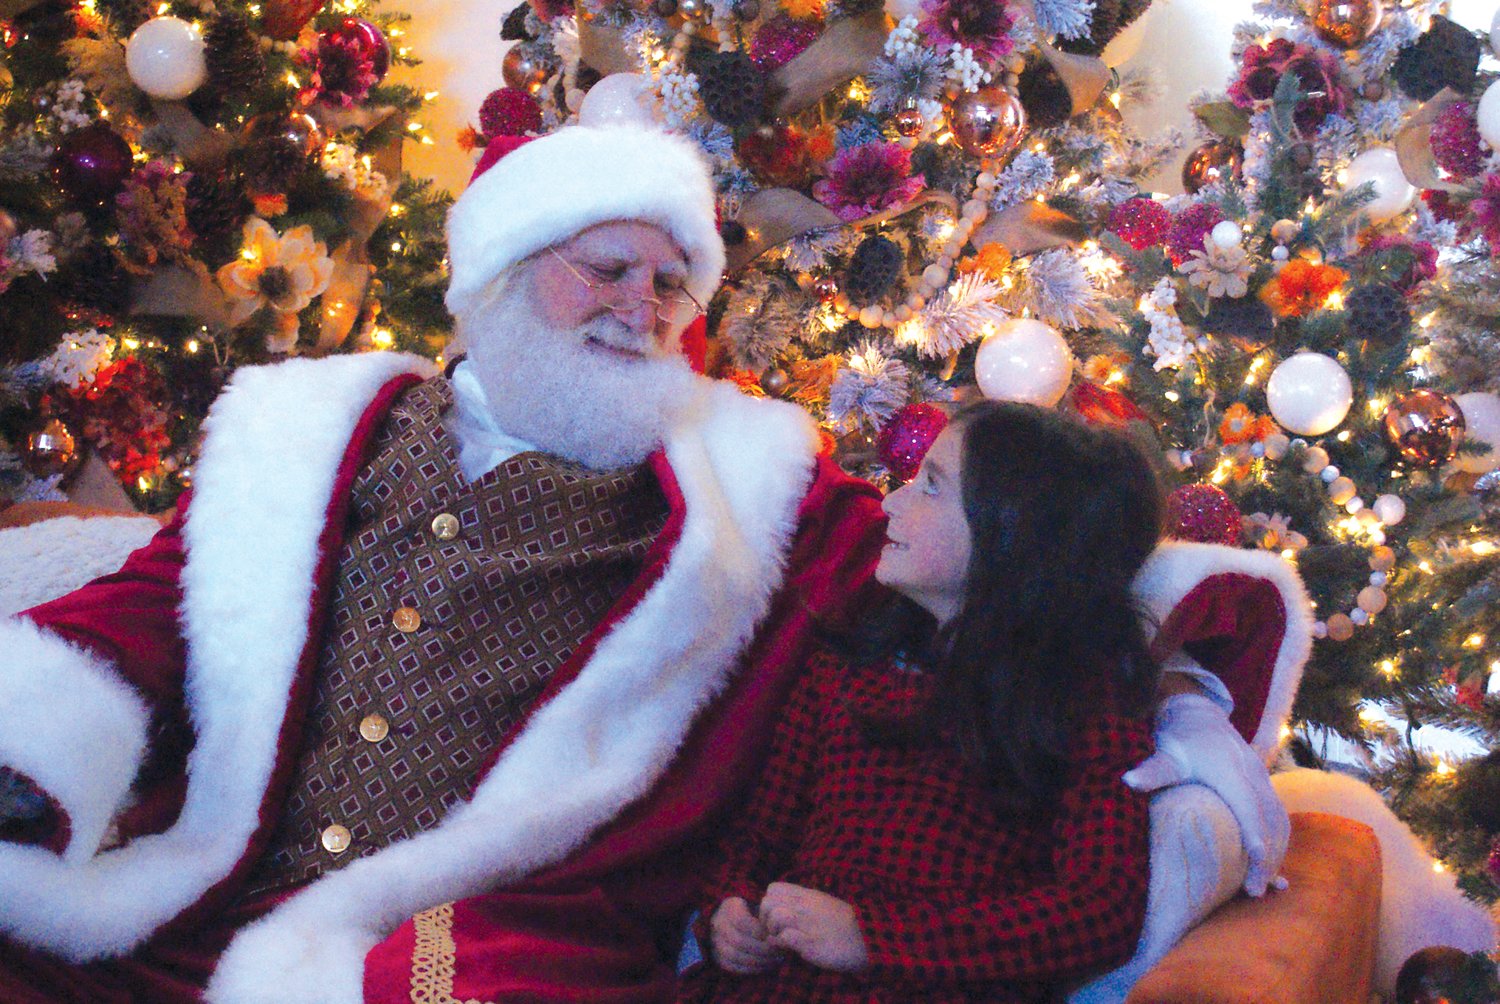 SPECIAL VISIT: Seven-year-old Olivia Crisafulli paid a special visit to Santa on Nov. 26.